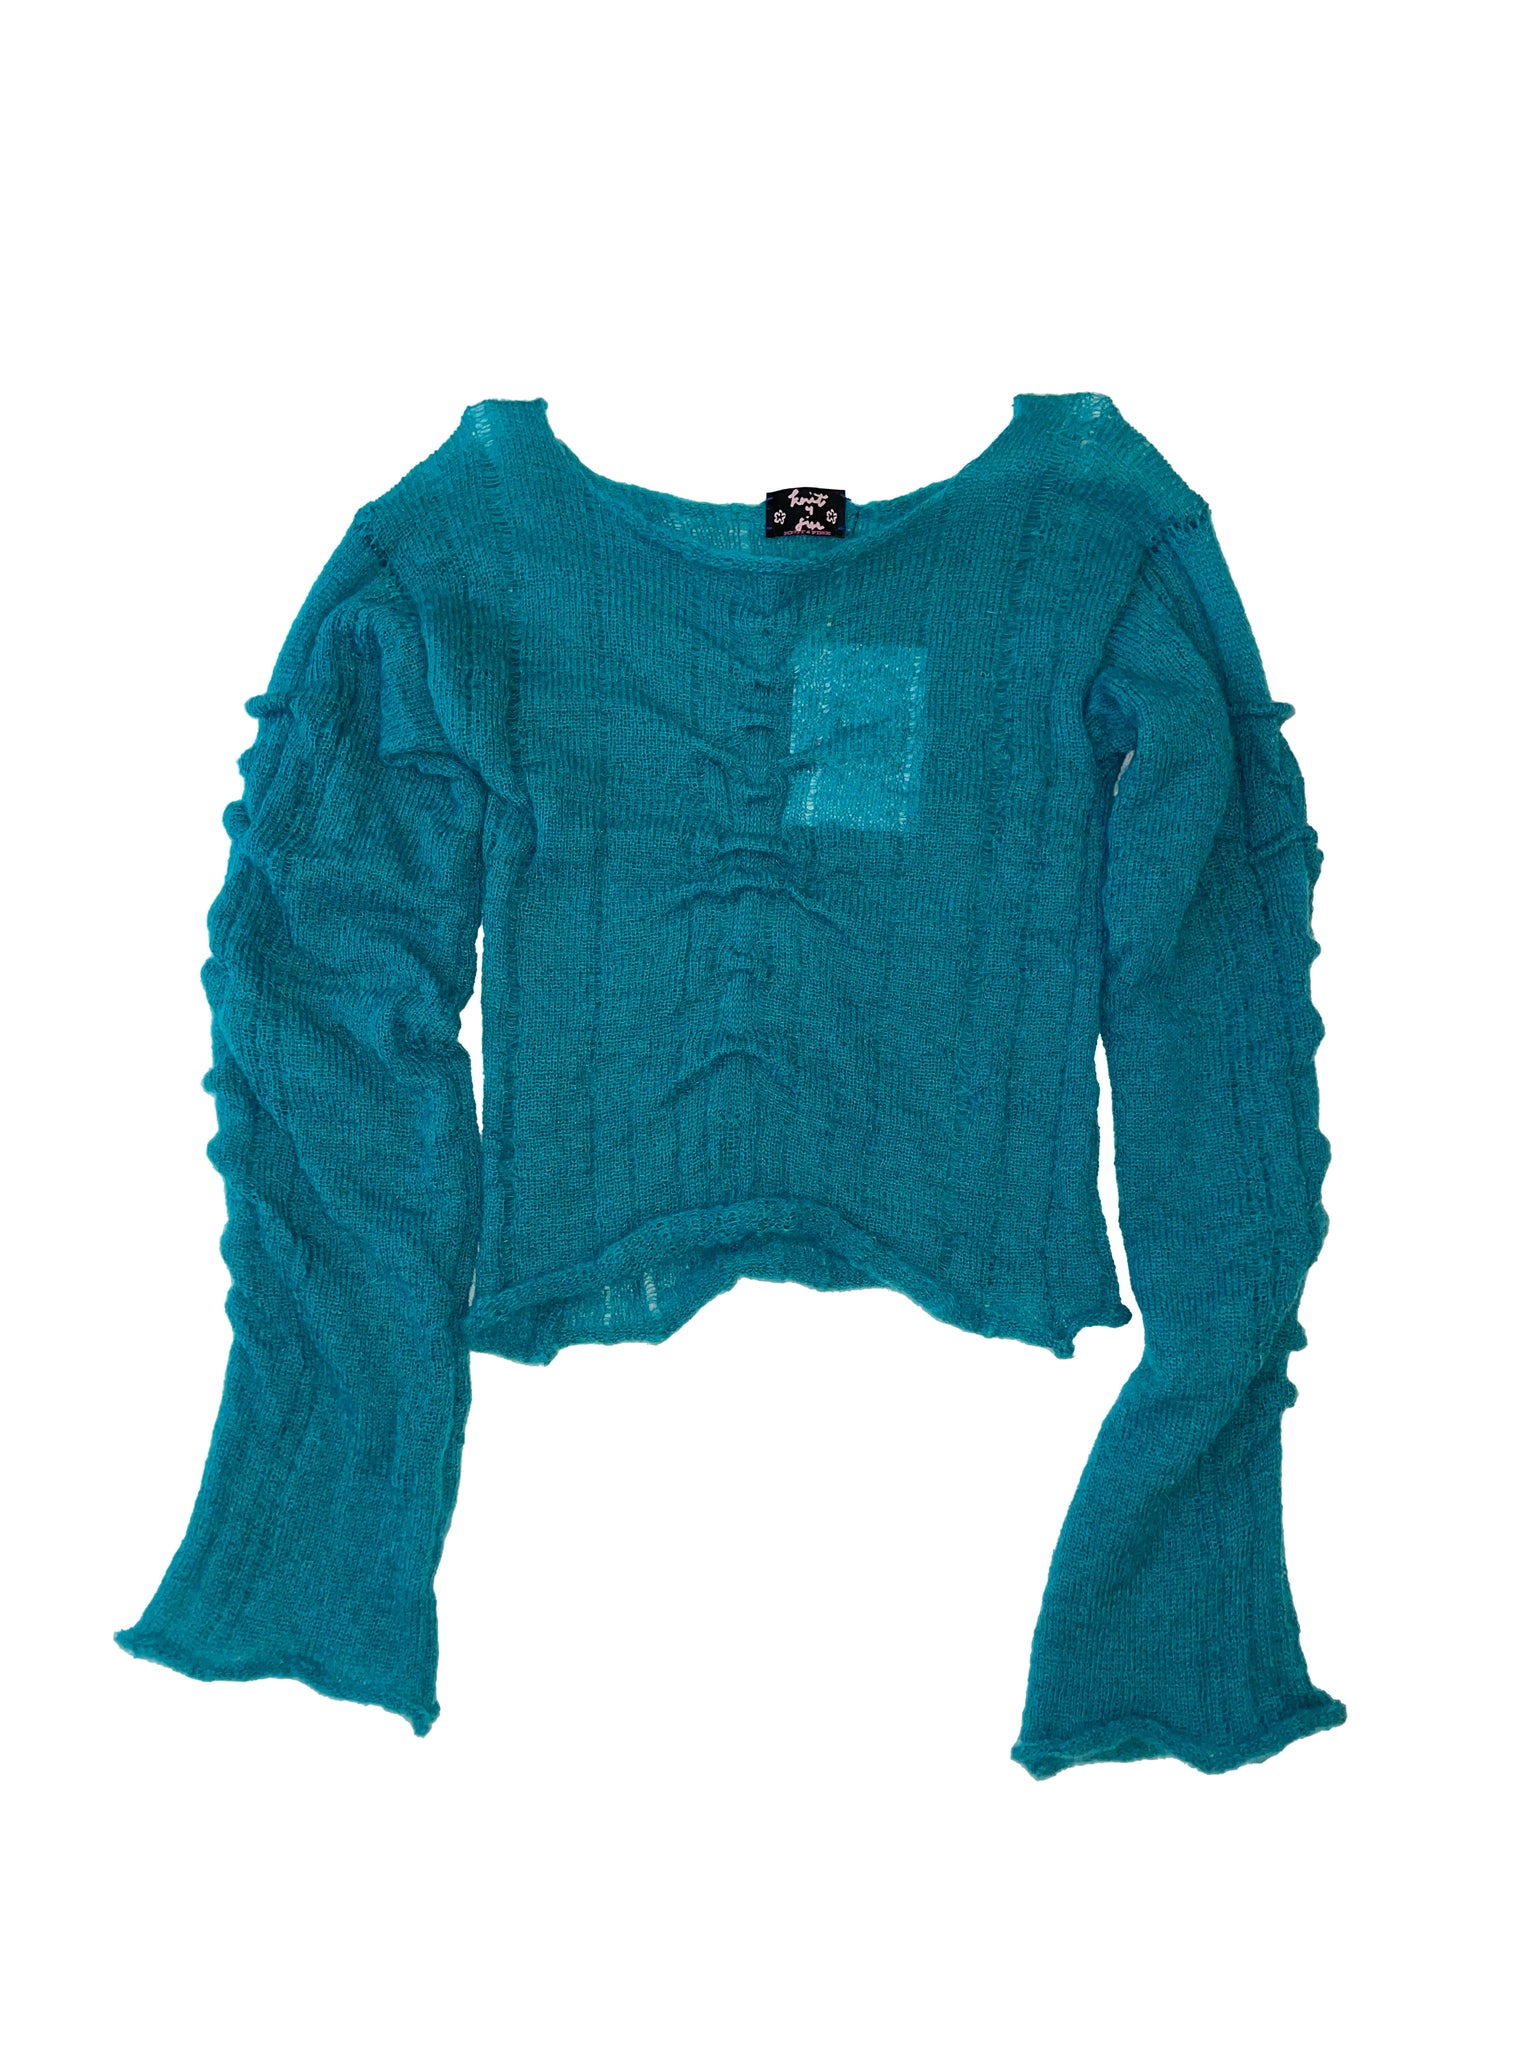 Turquoise mohair knit